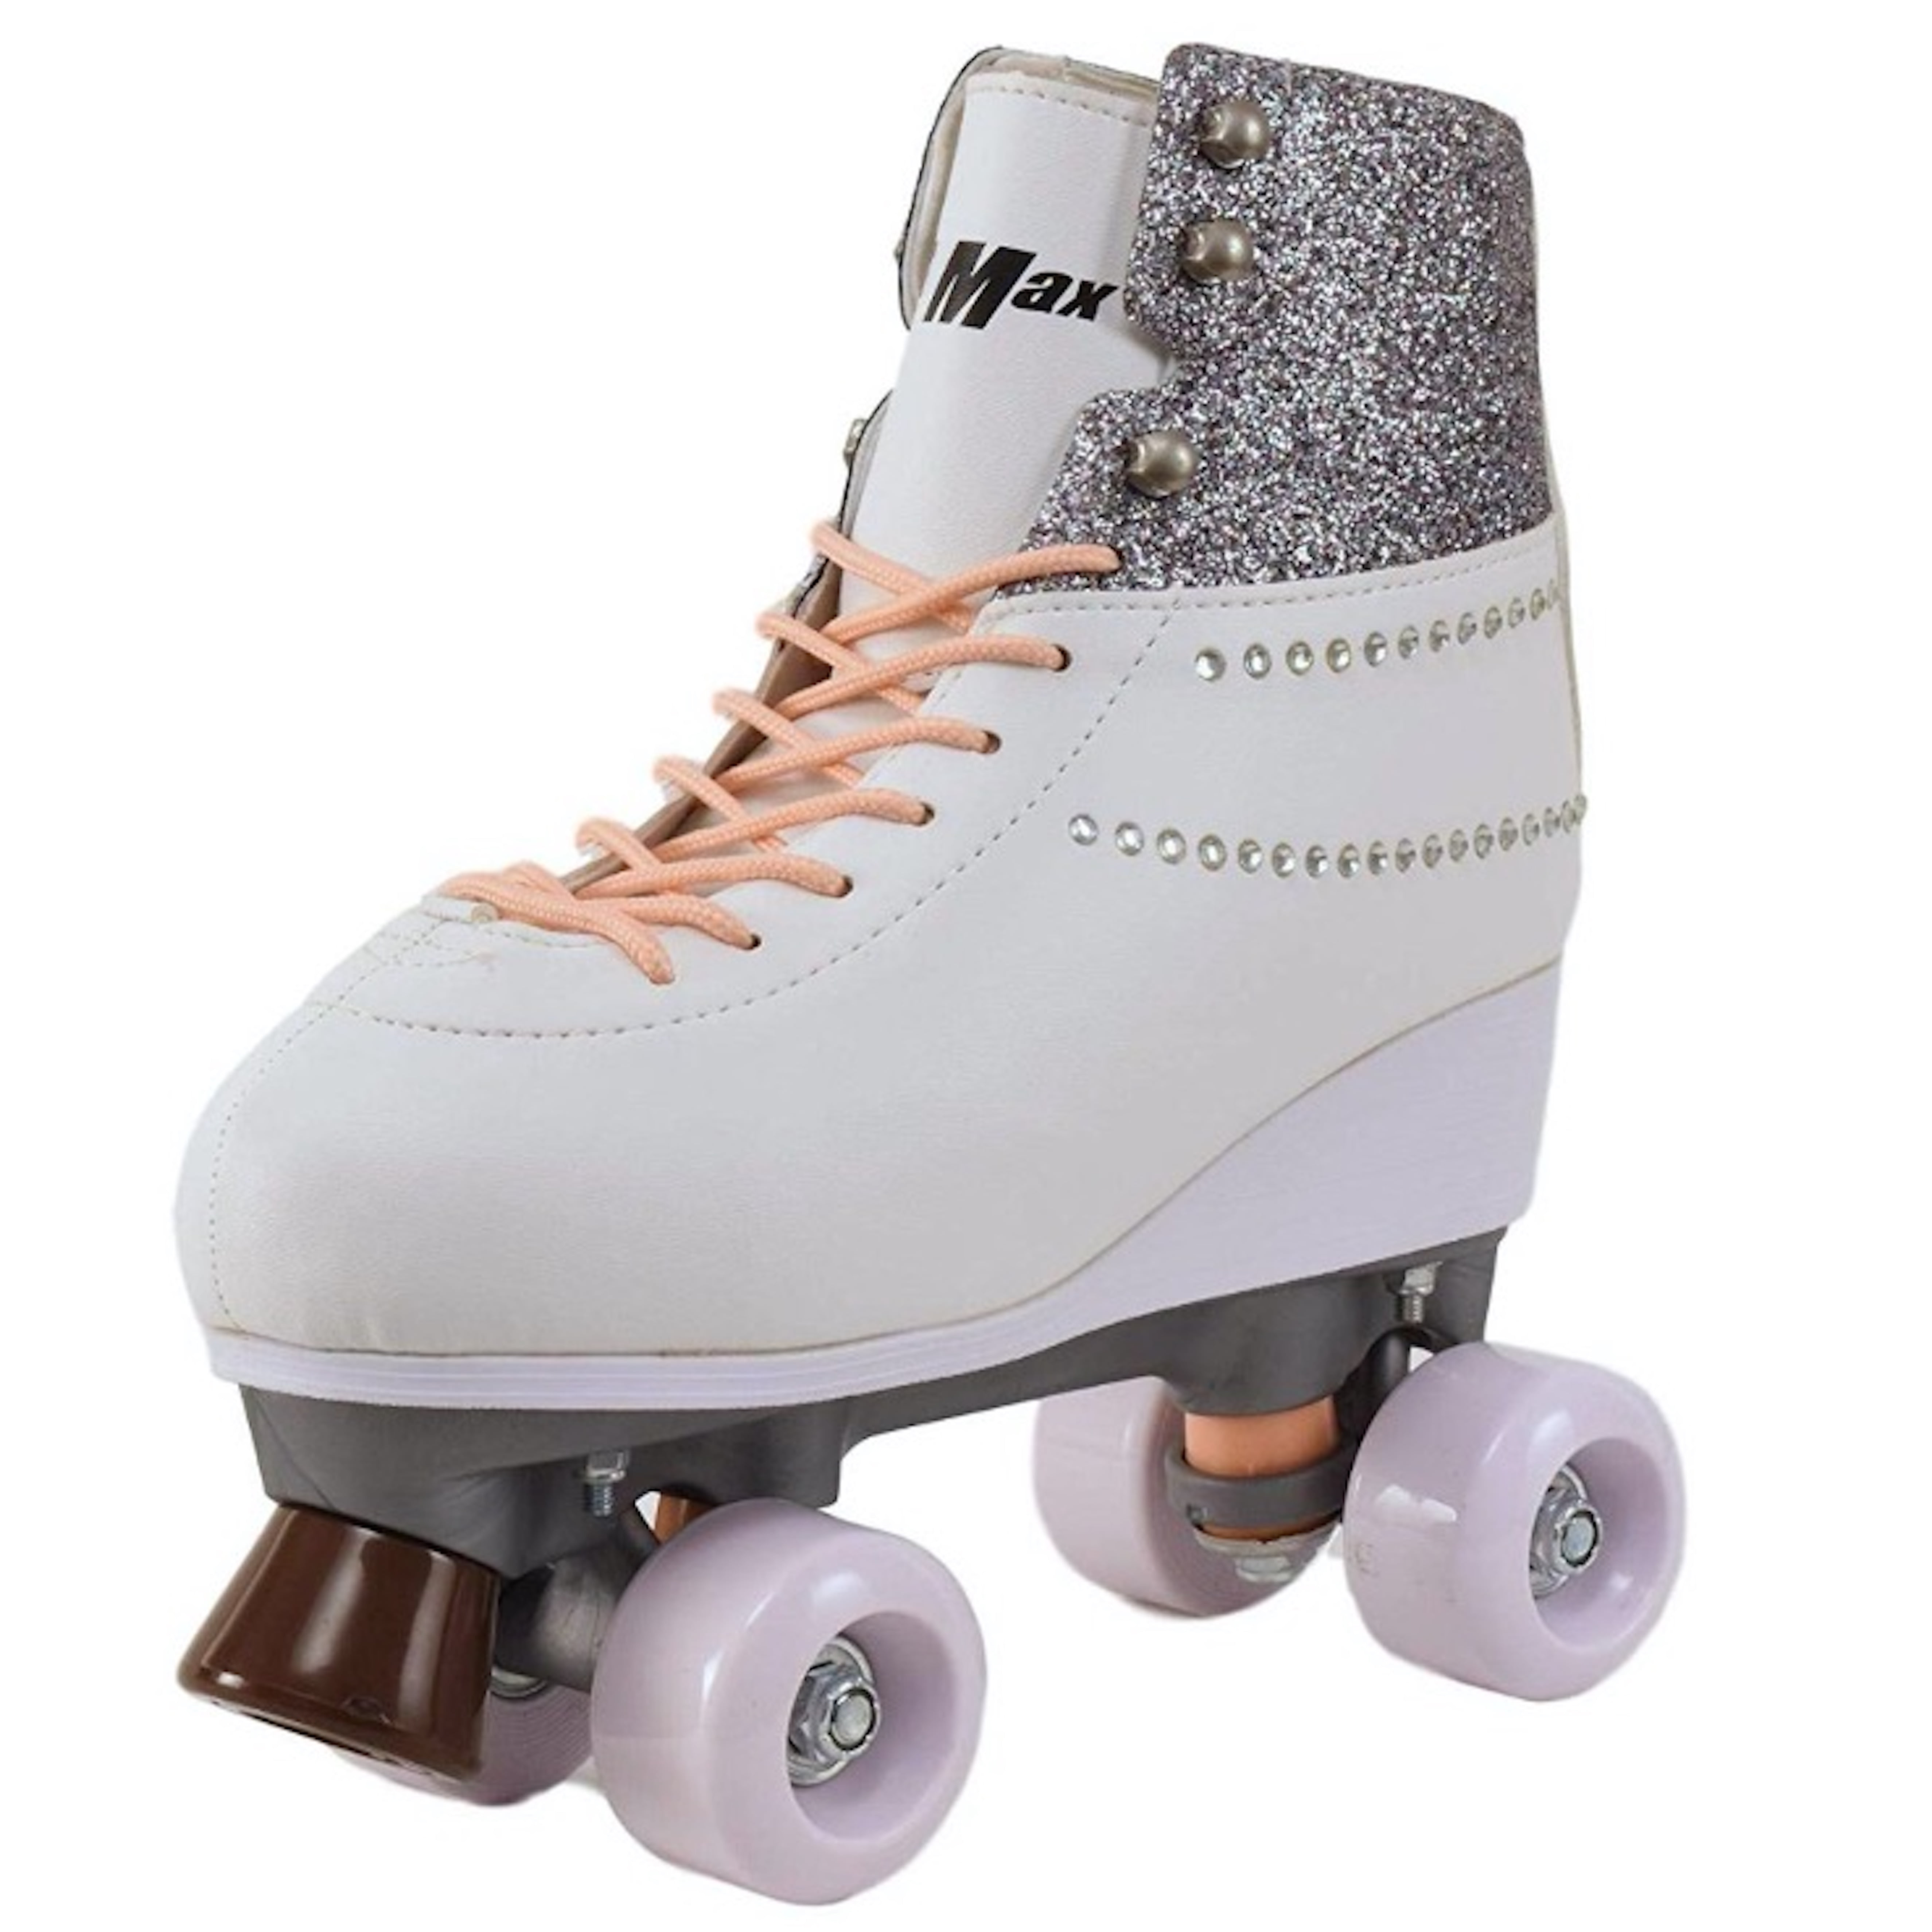 Women Roller Skates Classic High-top Fashion Roller Skates for Teens and Youth Indoor Outdoor Graffiti Roller Skate 